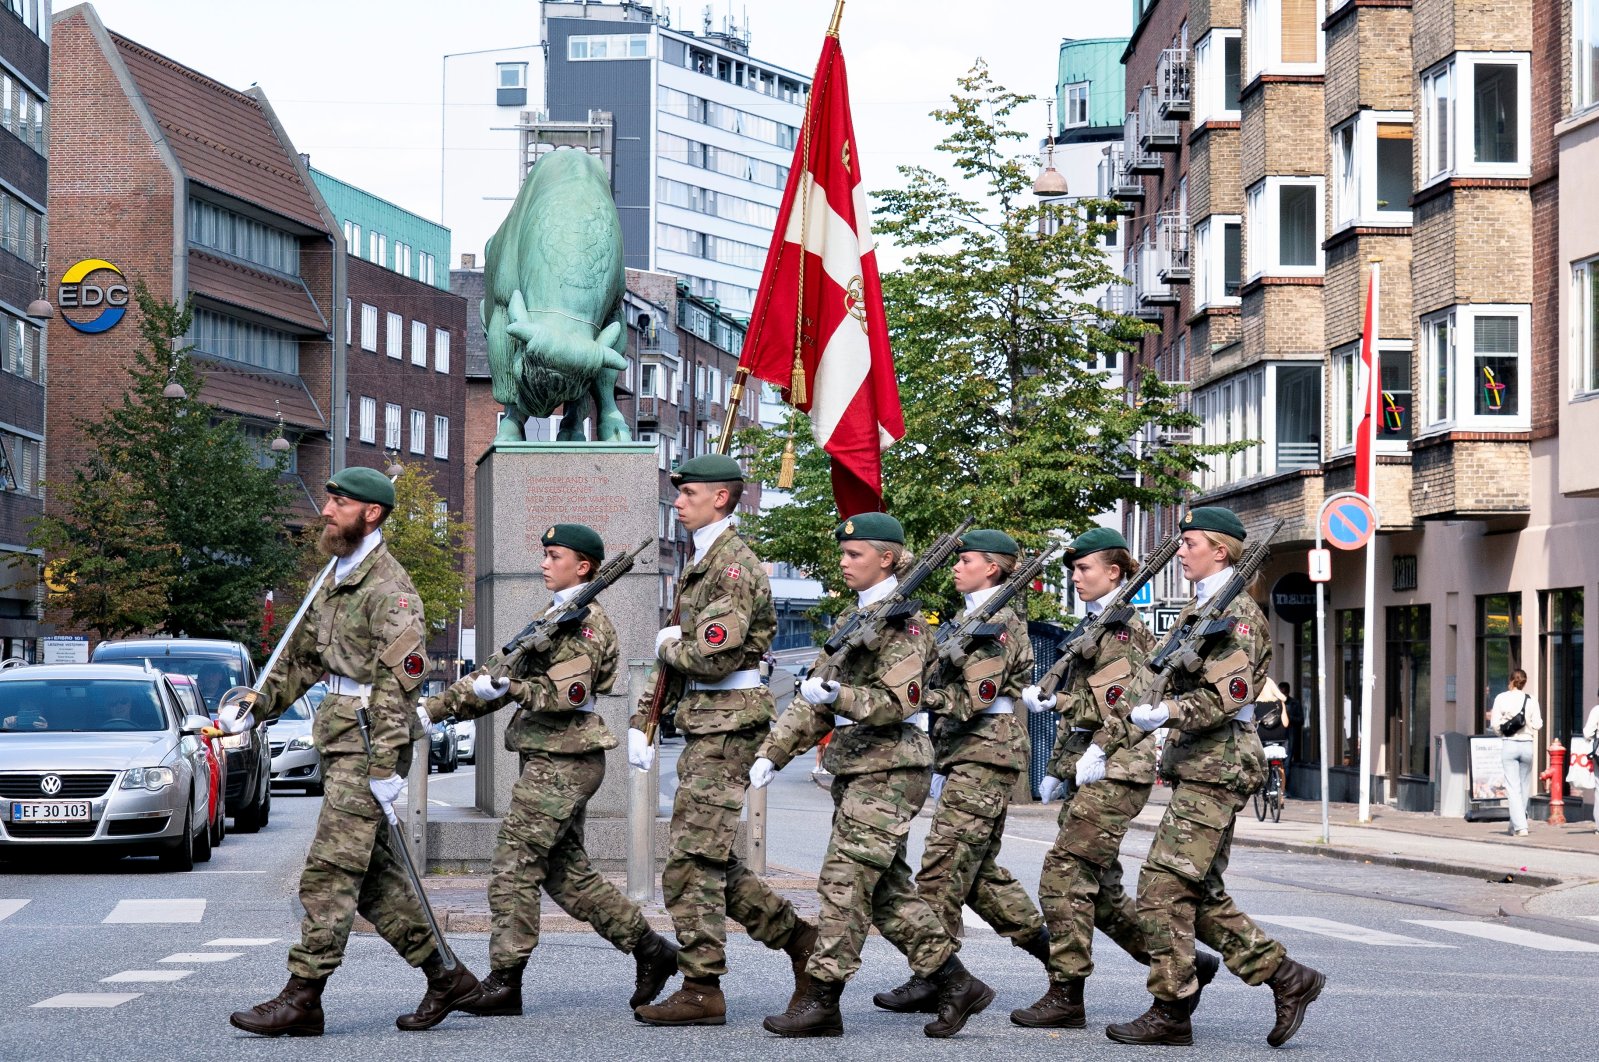 Officers carry Danish flags past The Cimbrer Bull during the official Flag Day in honor of Denmark's deployed soldiers through the ages, in Aalborg, Denmark, Sept. 5, 2021. (Reuters Photo)